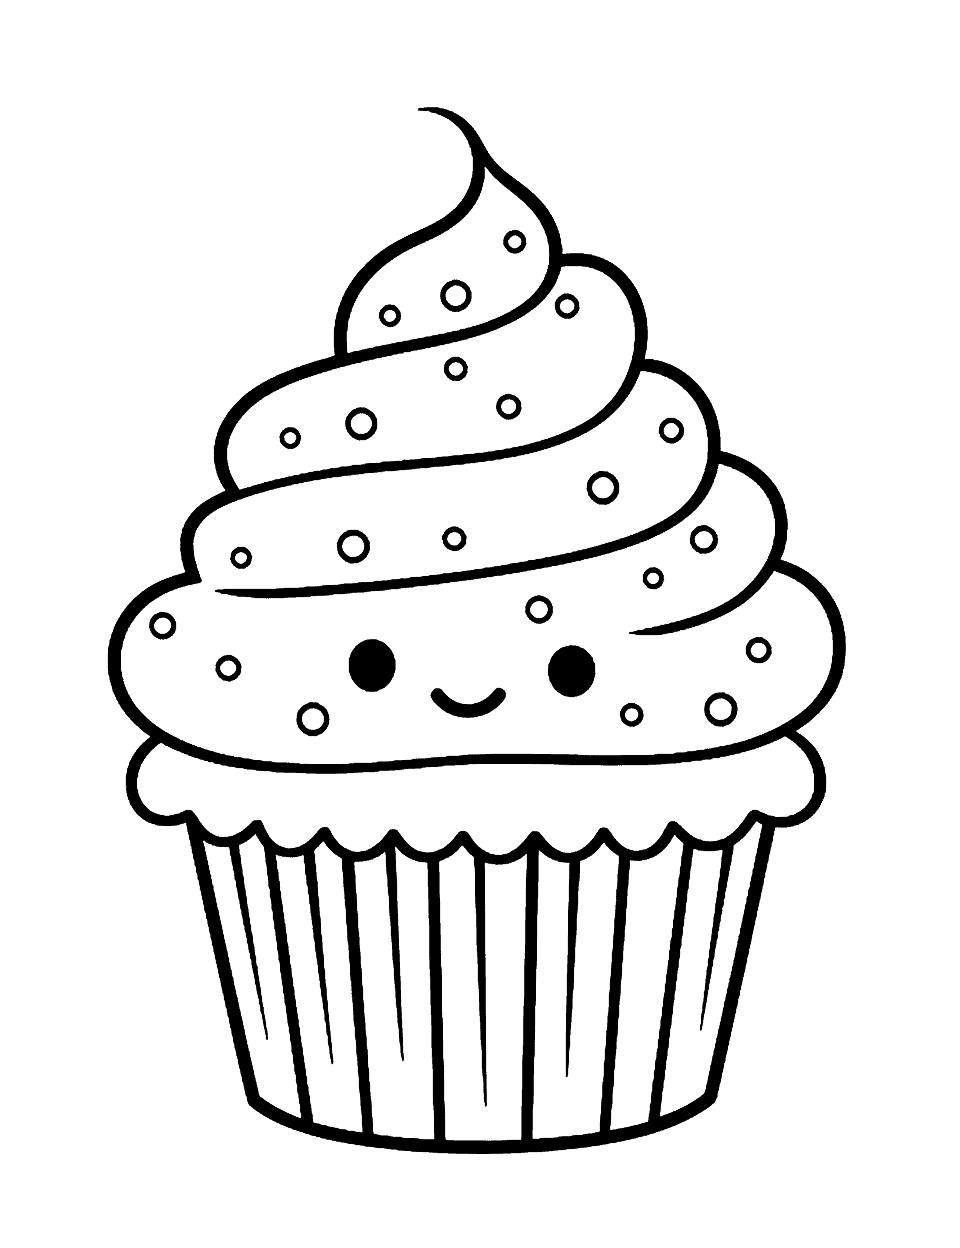 Adorable Cupcake Cute Coloring Page - A delicious cupcake with a cute face and sprinkles on top.